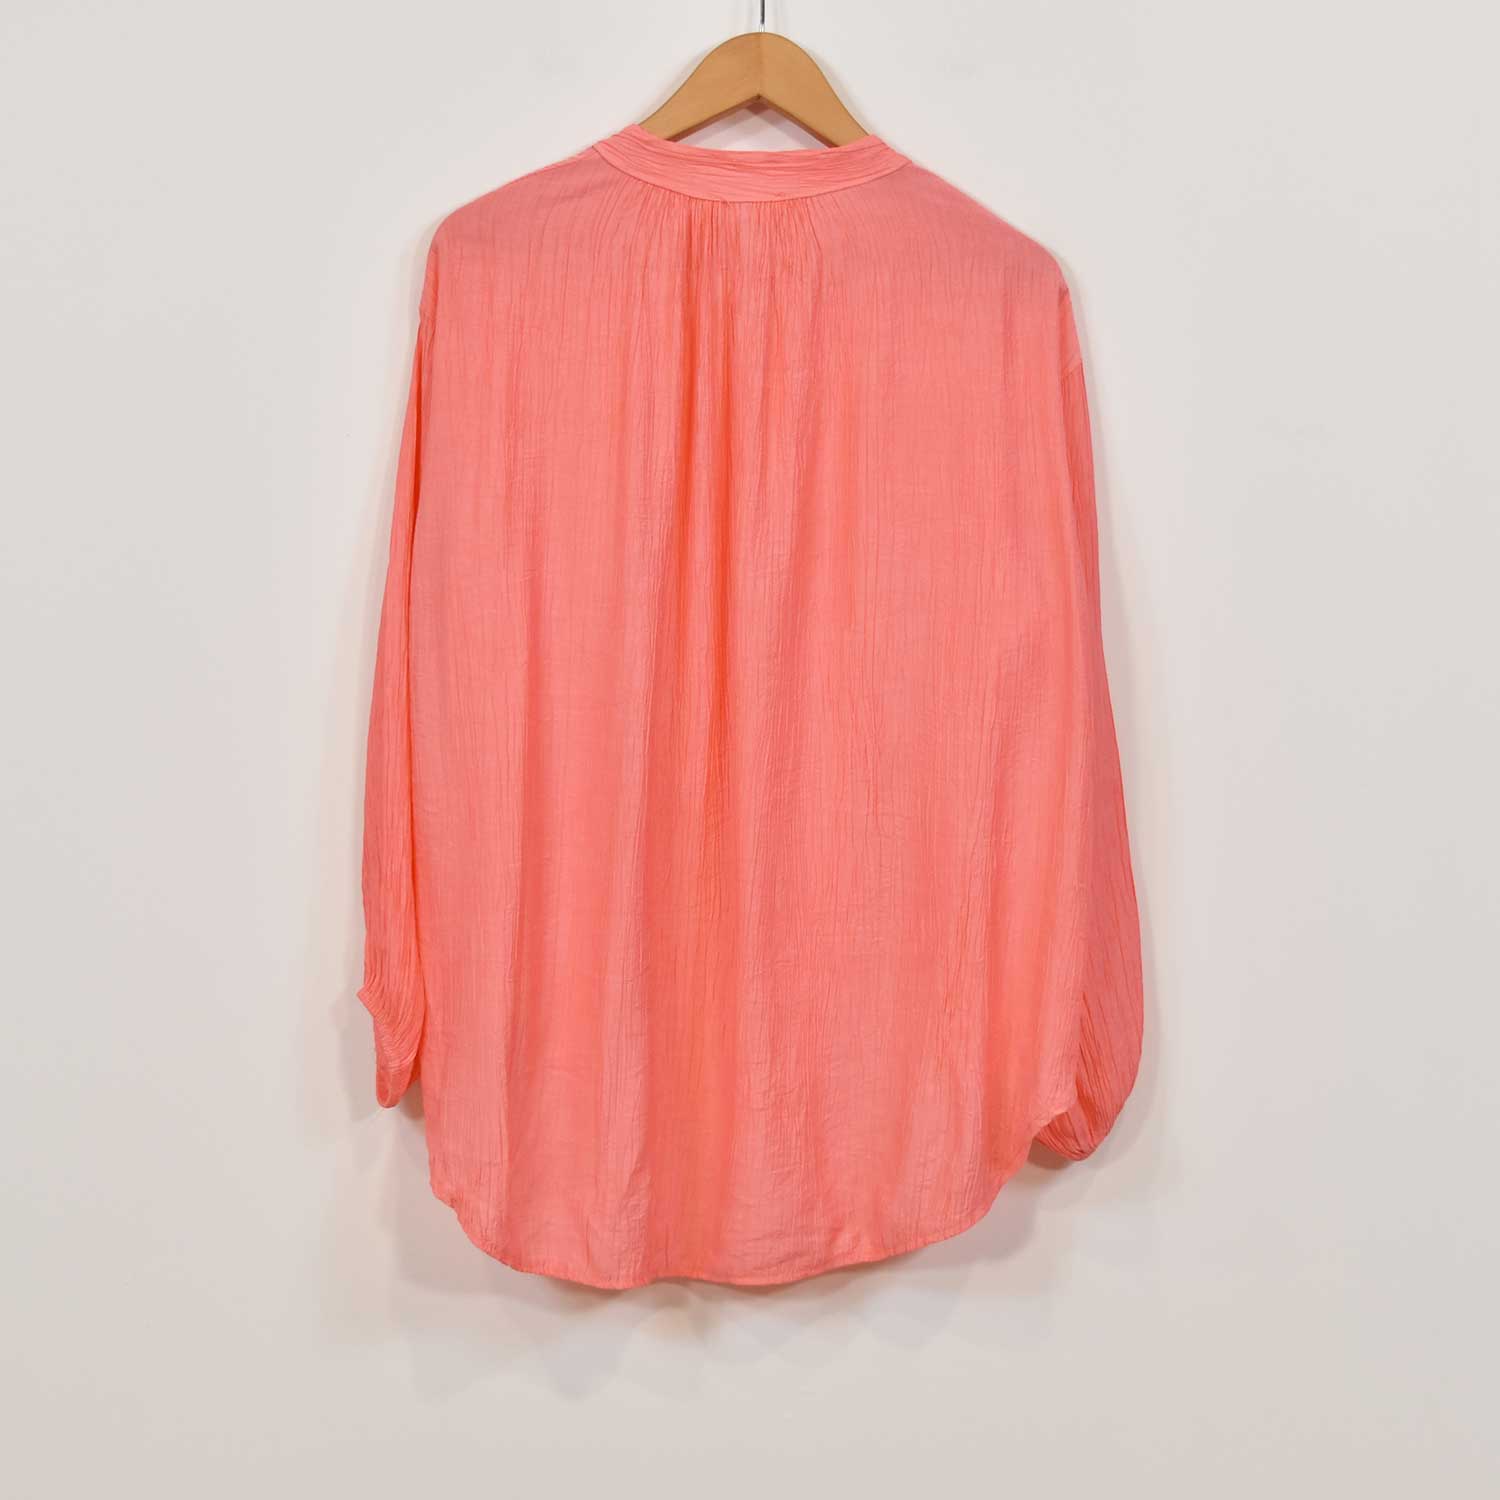 Coral ruffled blouse